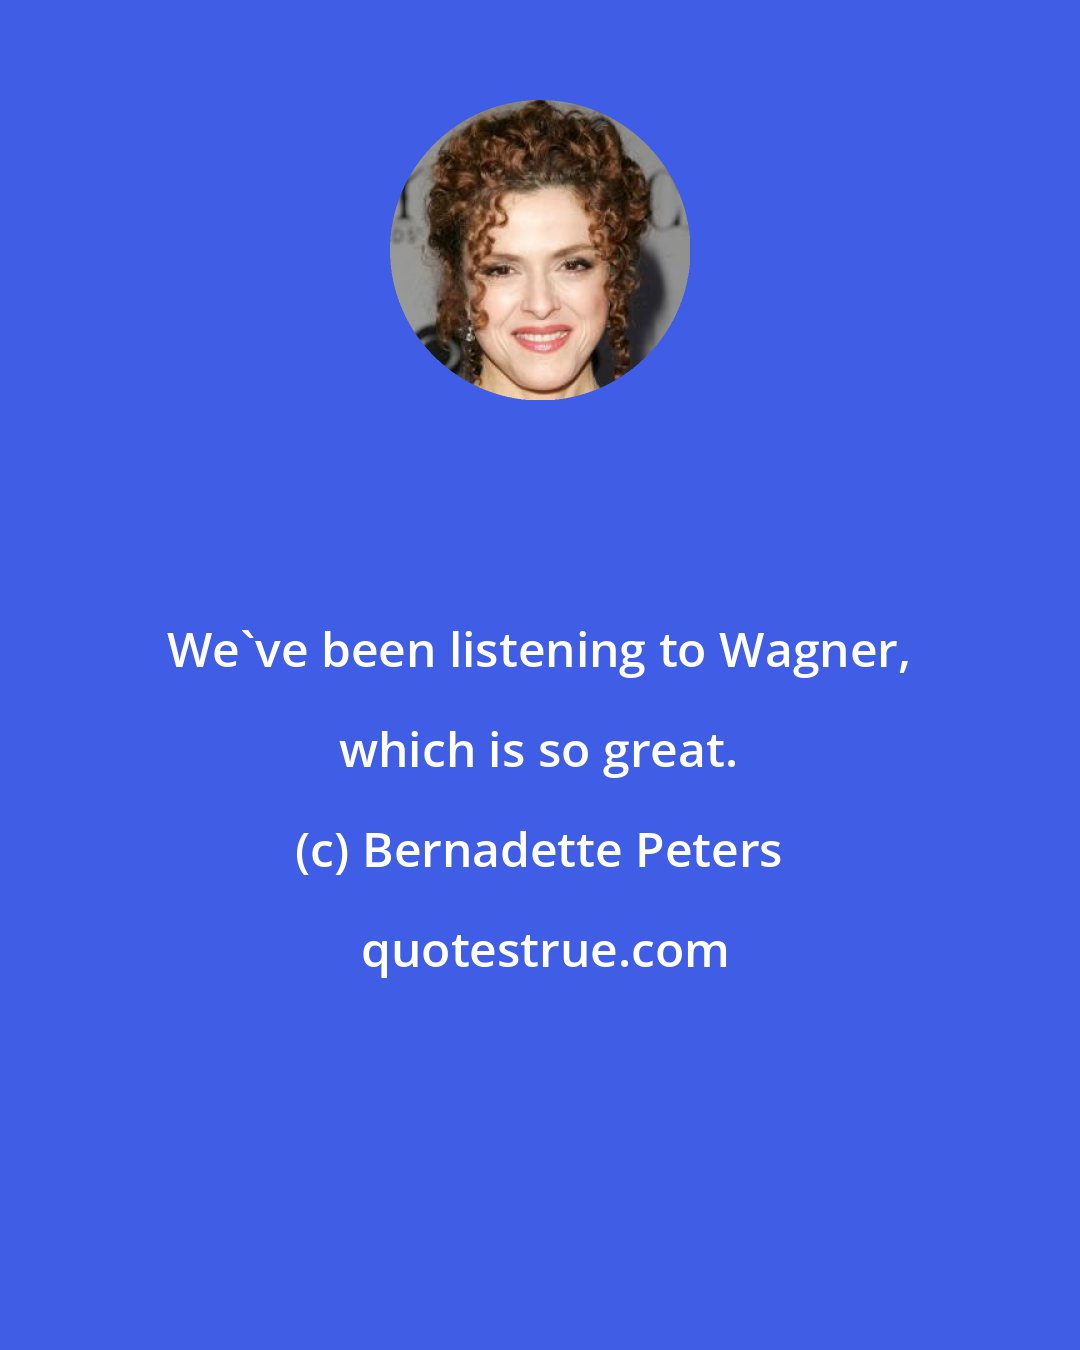 Bernadette Peters: We've been listening to Wagner, which is so great.